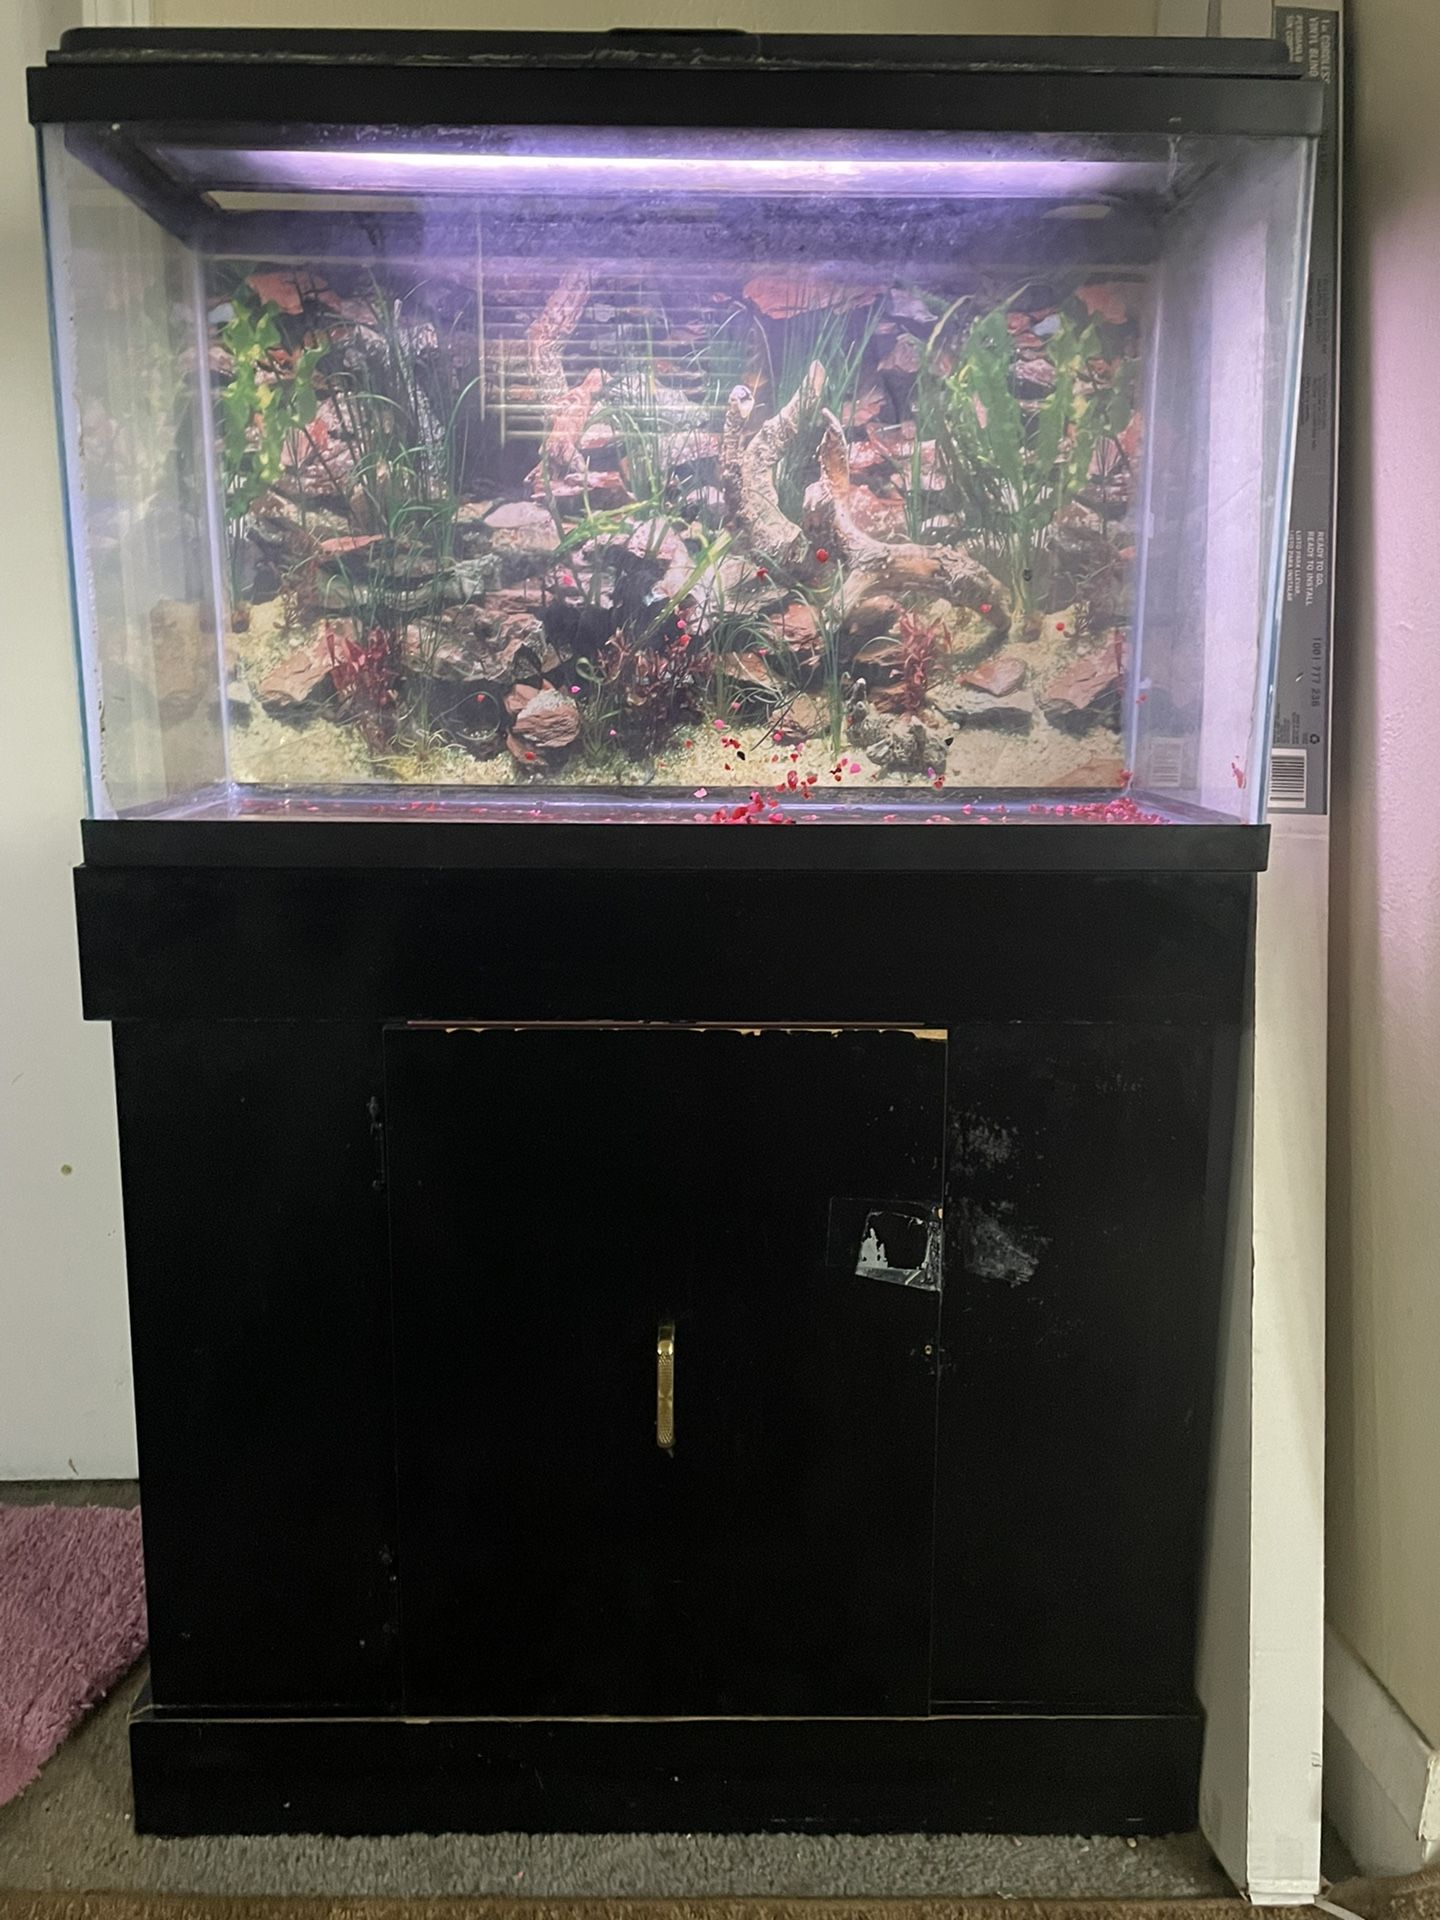 30 Gal Aquarium And Stand With Light However No Filter Or Heater  $75.00